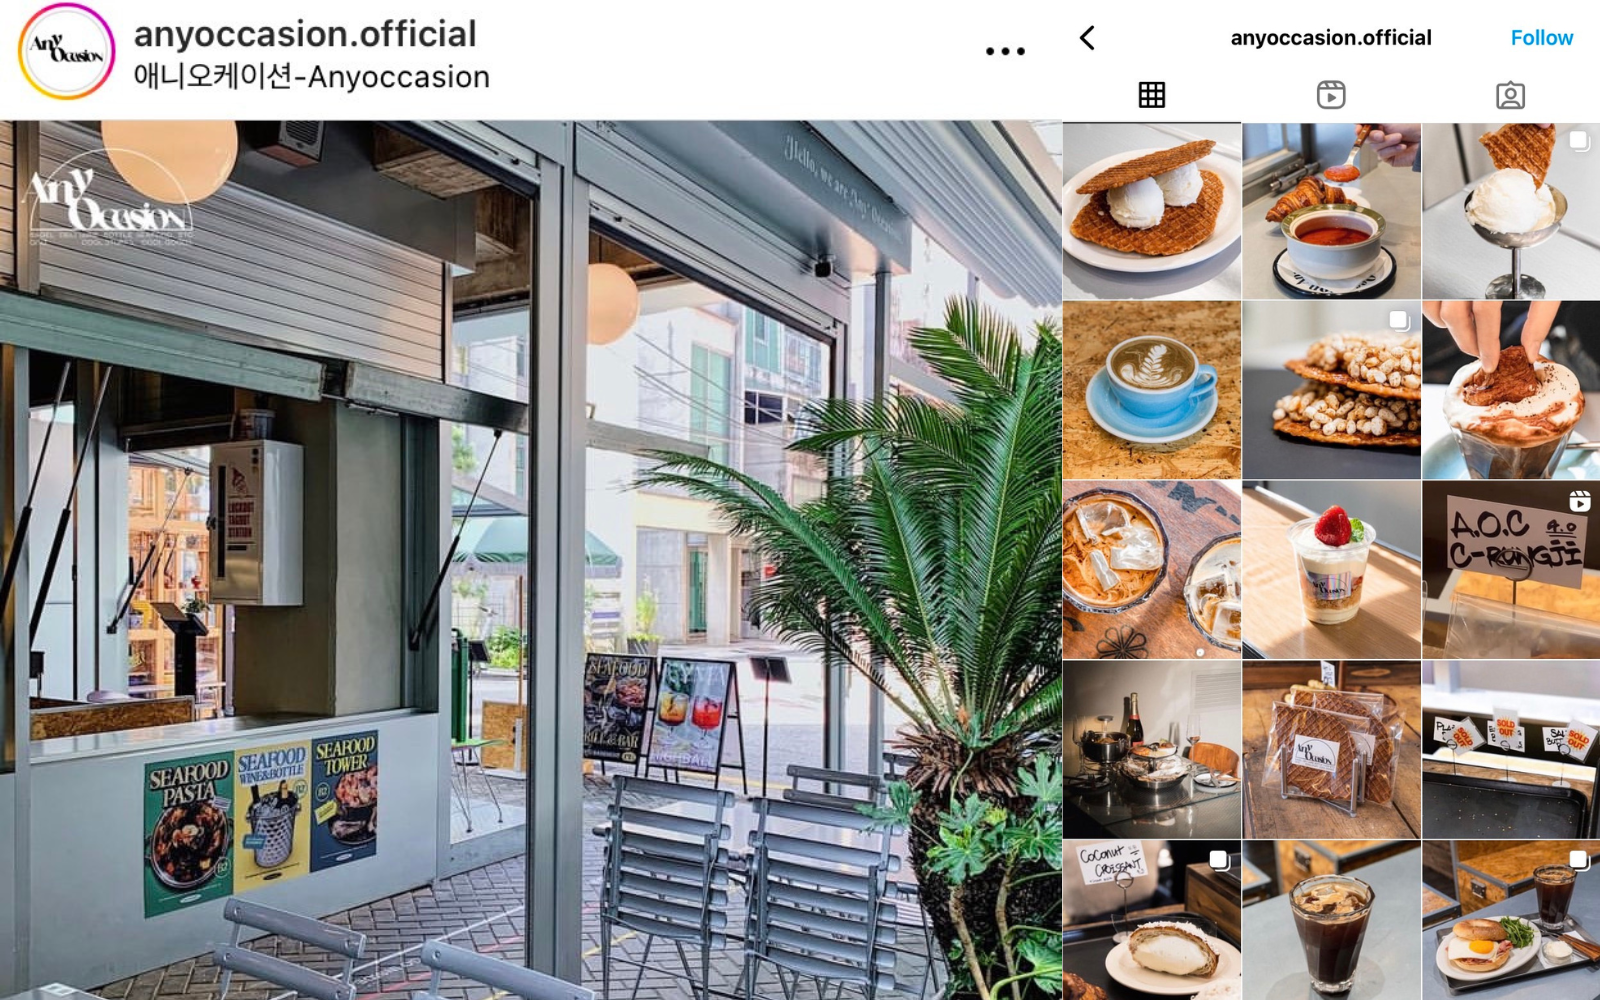 Korean cafe - anyoccation.official